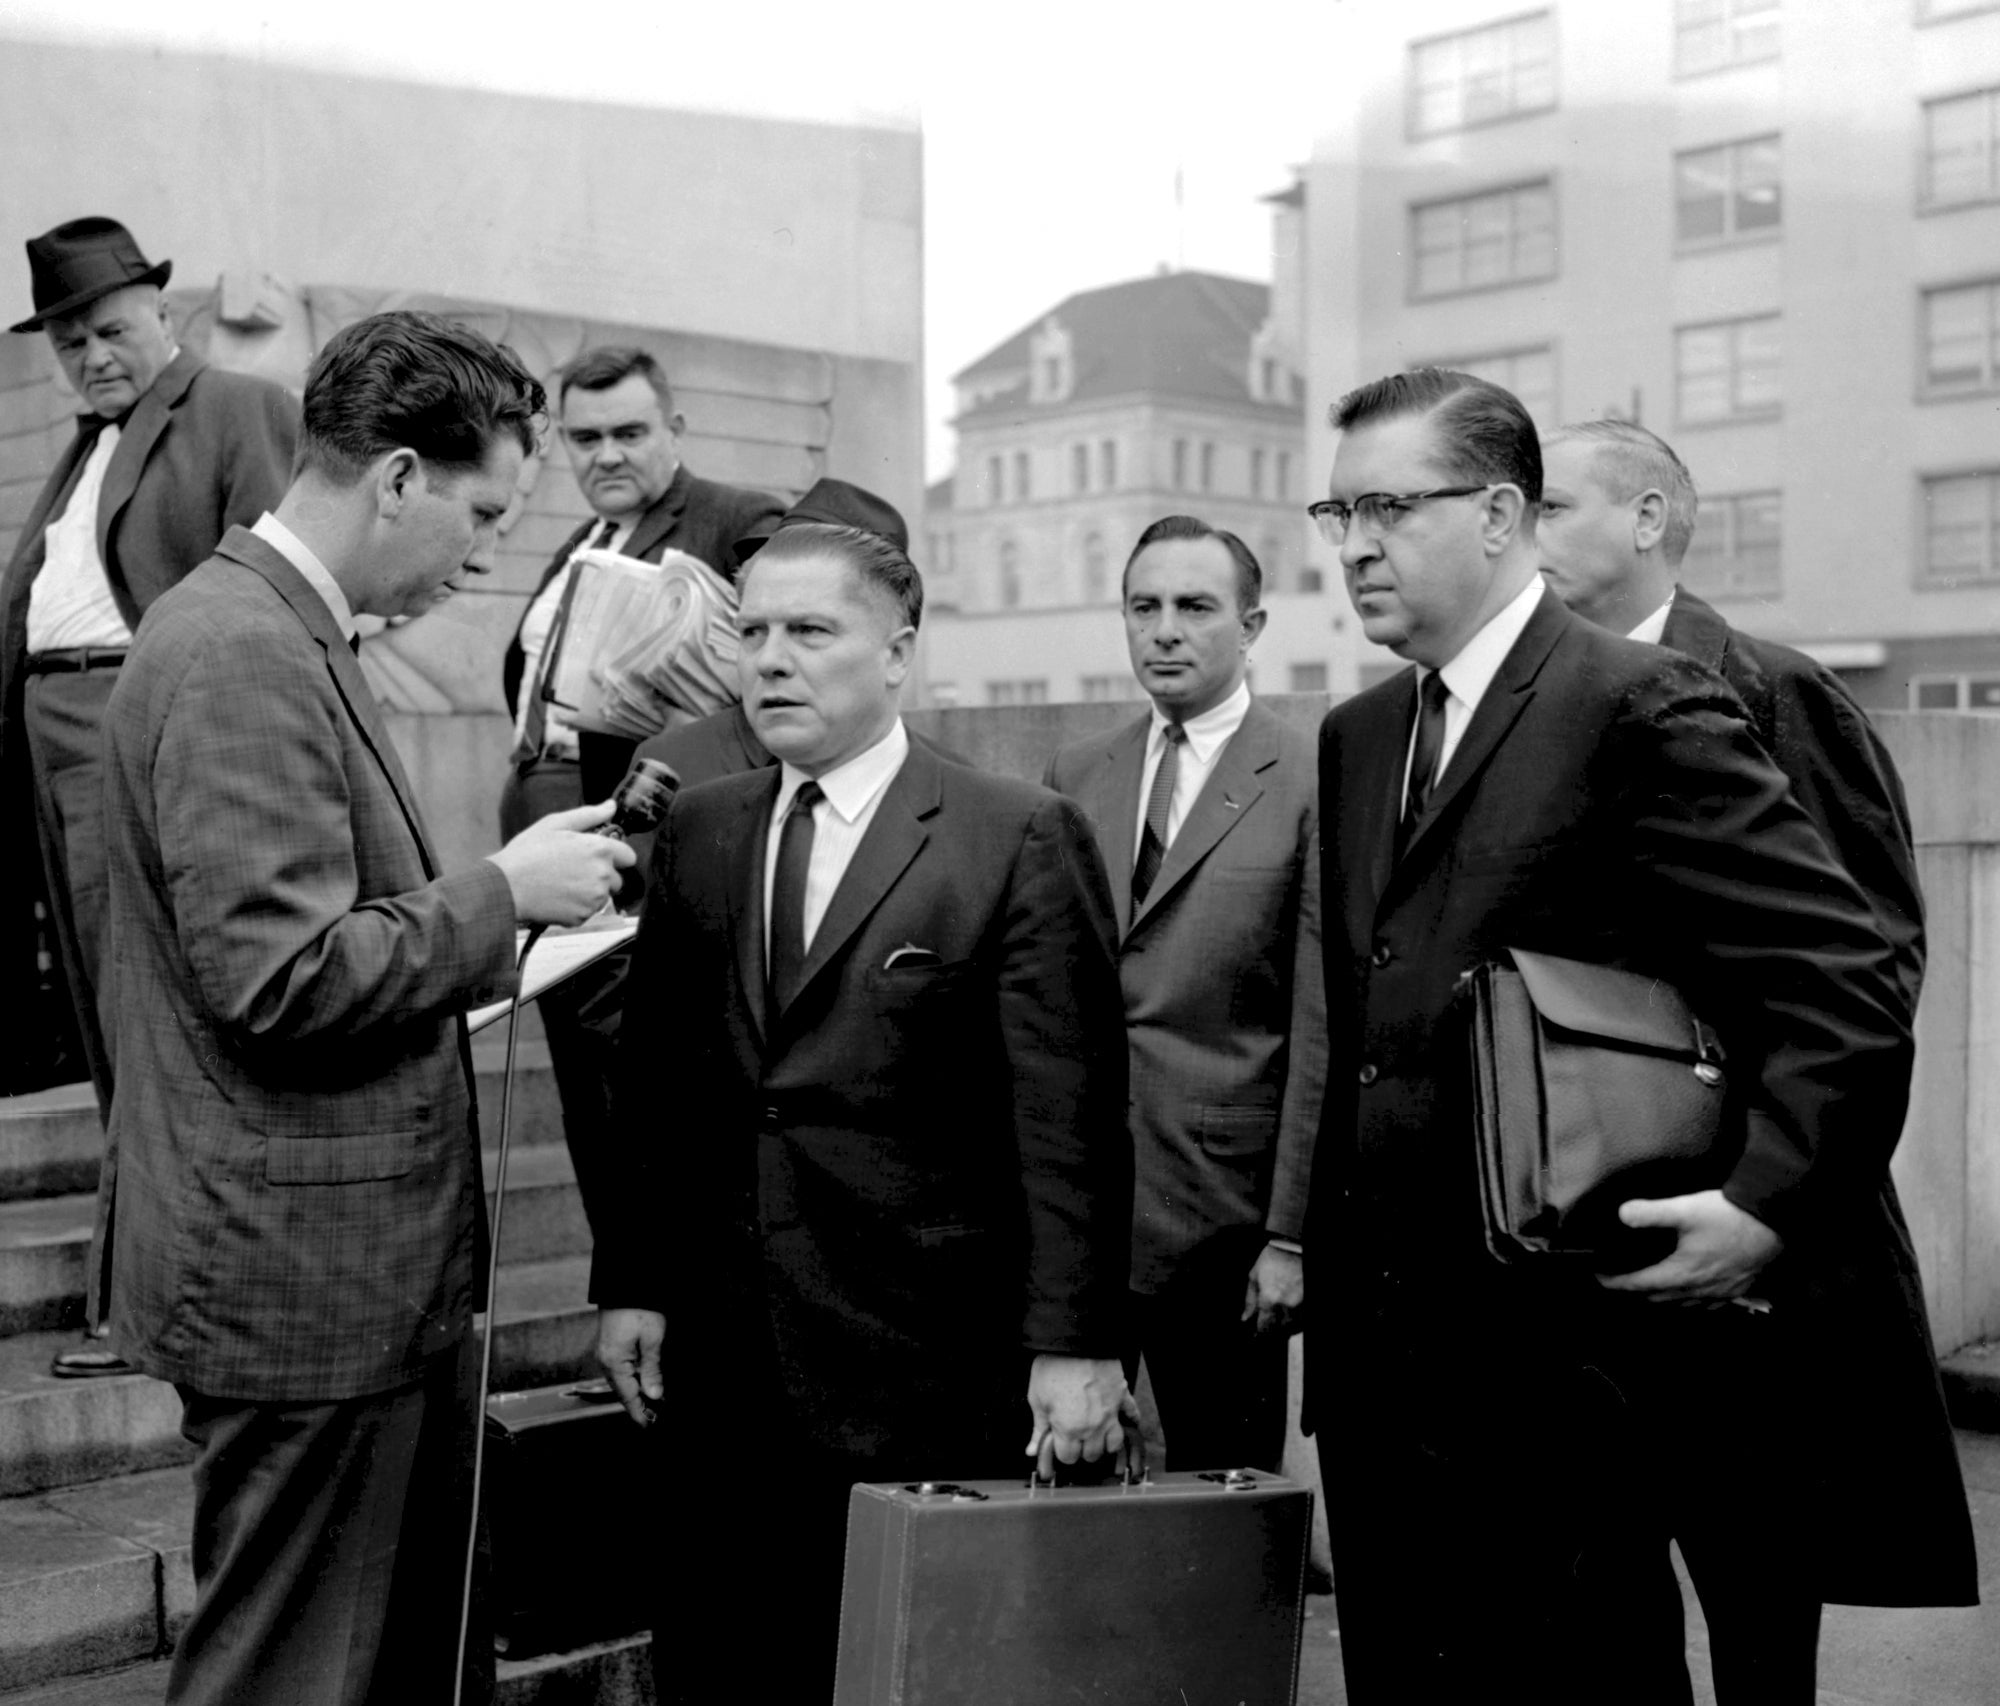 A reporter questions Teamsters general president Jimmy Hoffa outside of the federal courthouse in Chattanooga, Tennessee, in 1964 during his jury tampering trial